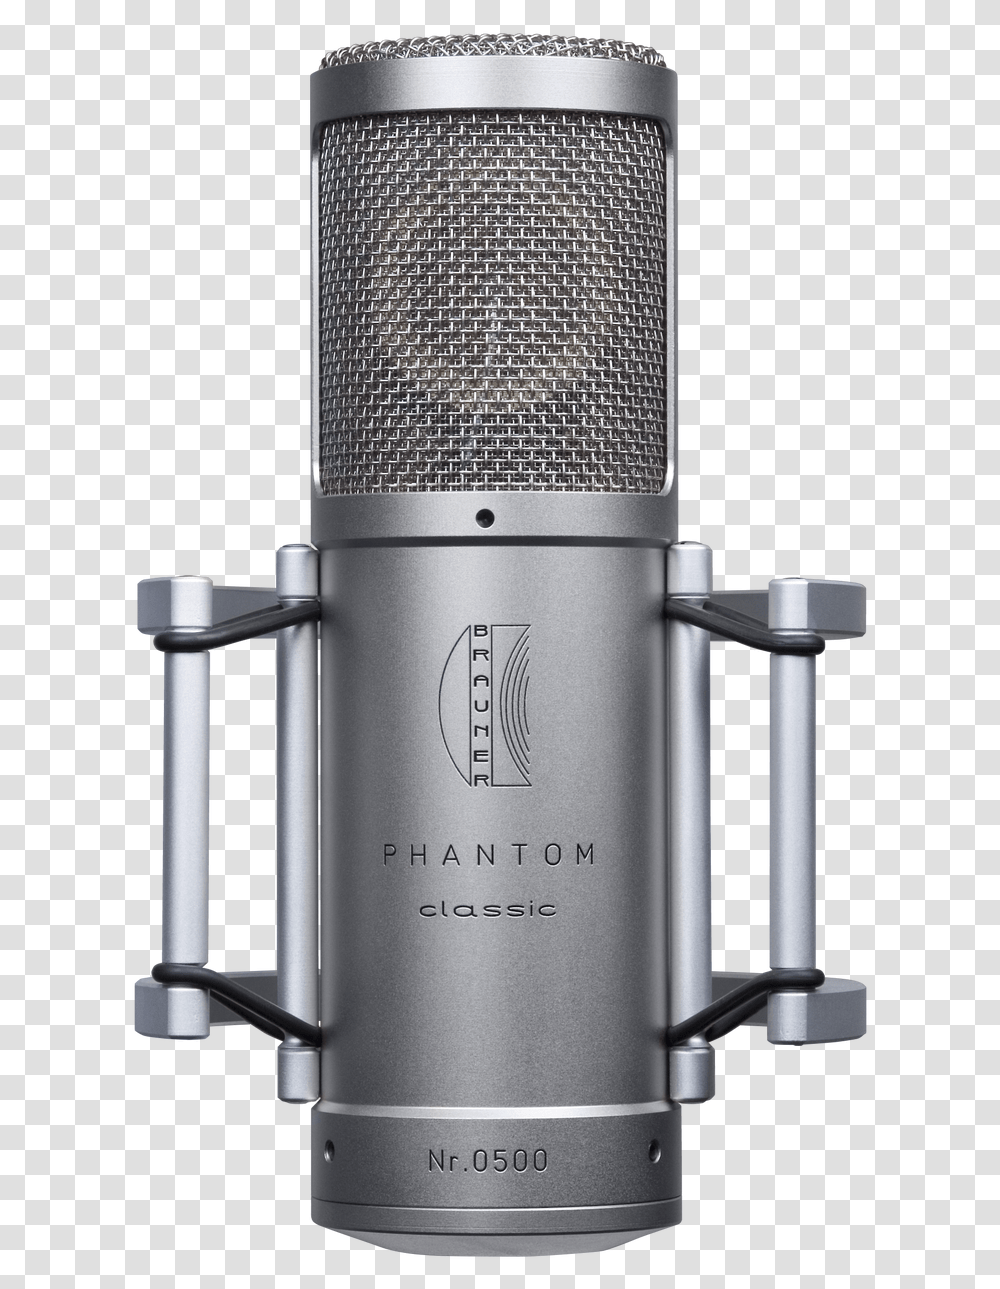 Brauner Phantom Classic Microphone Brauner Microphone, Electrical Device, Mixer, Appliance Transparent Png